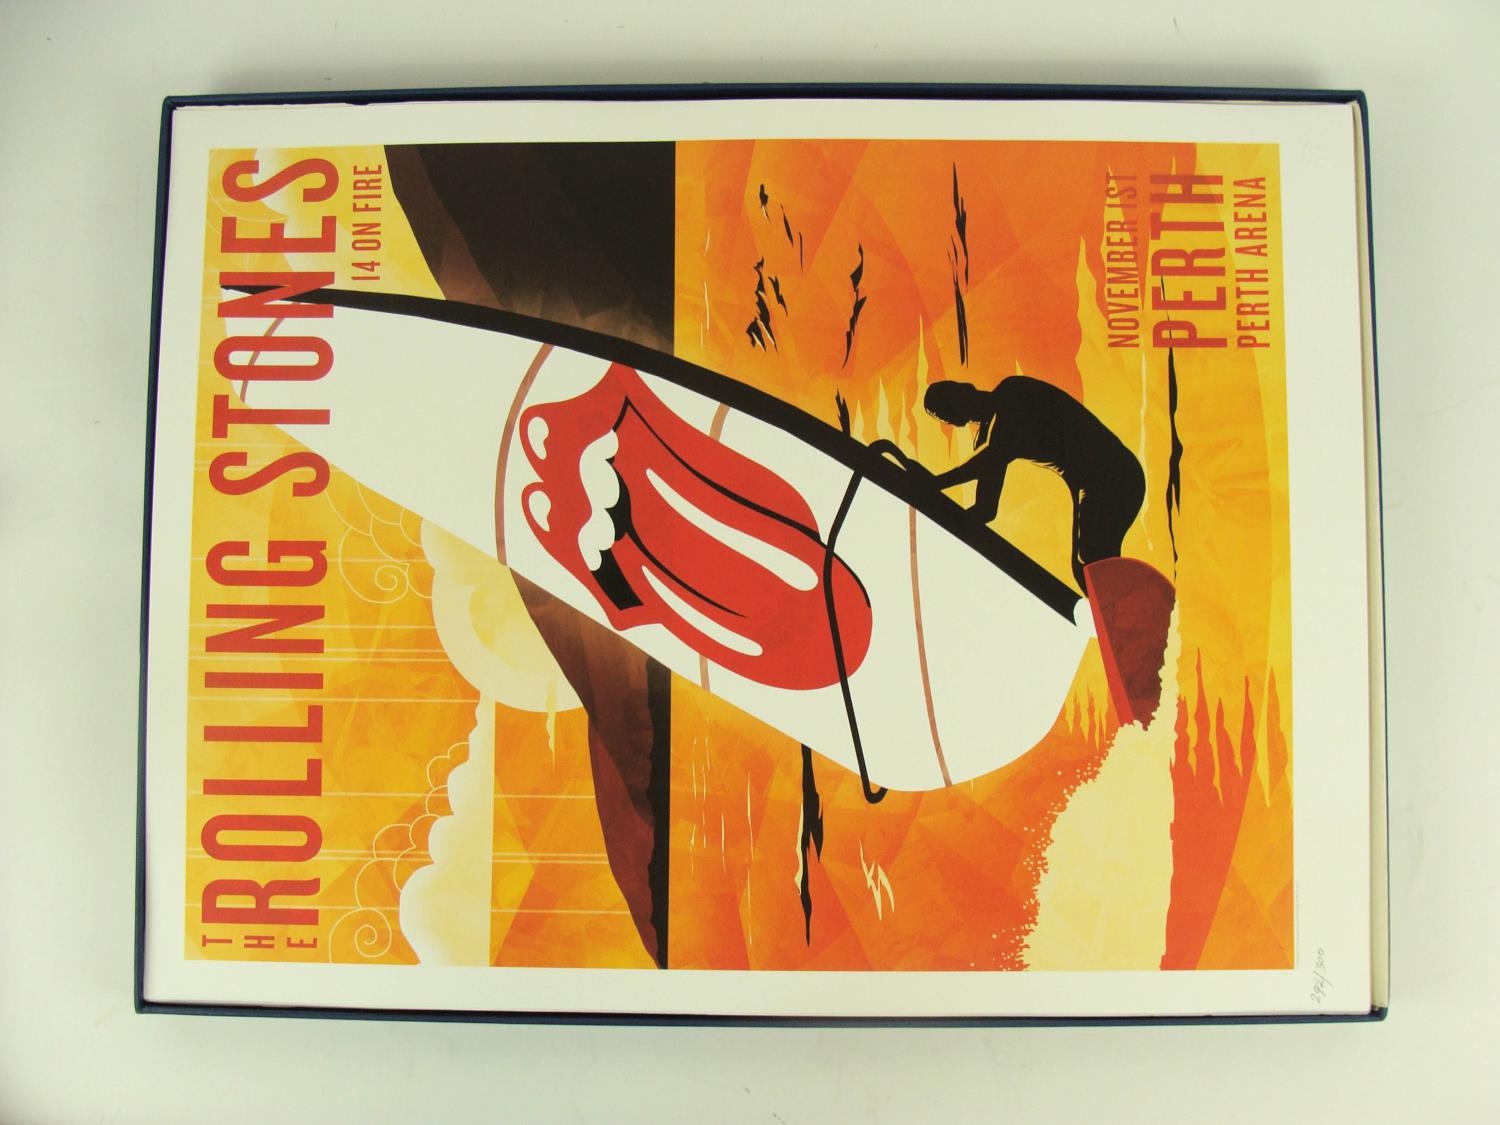 ROLLING STONES '14 on FIRE' BOX SET, of 13 lithographic posters from the 2014 Australia and New - Image 8 of 21